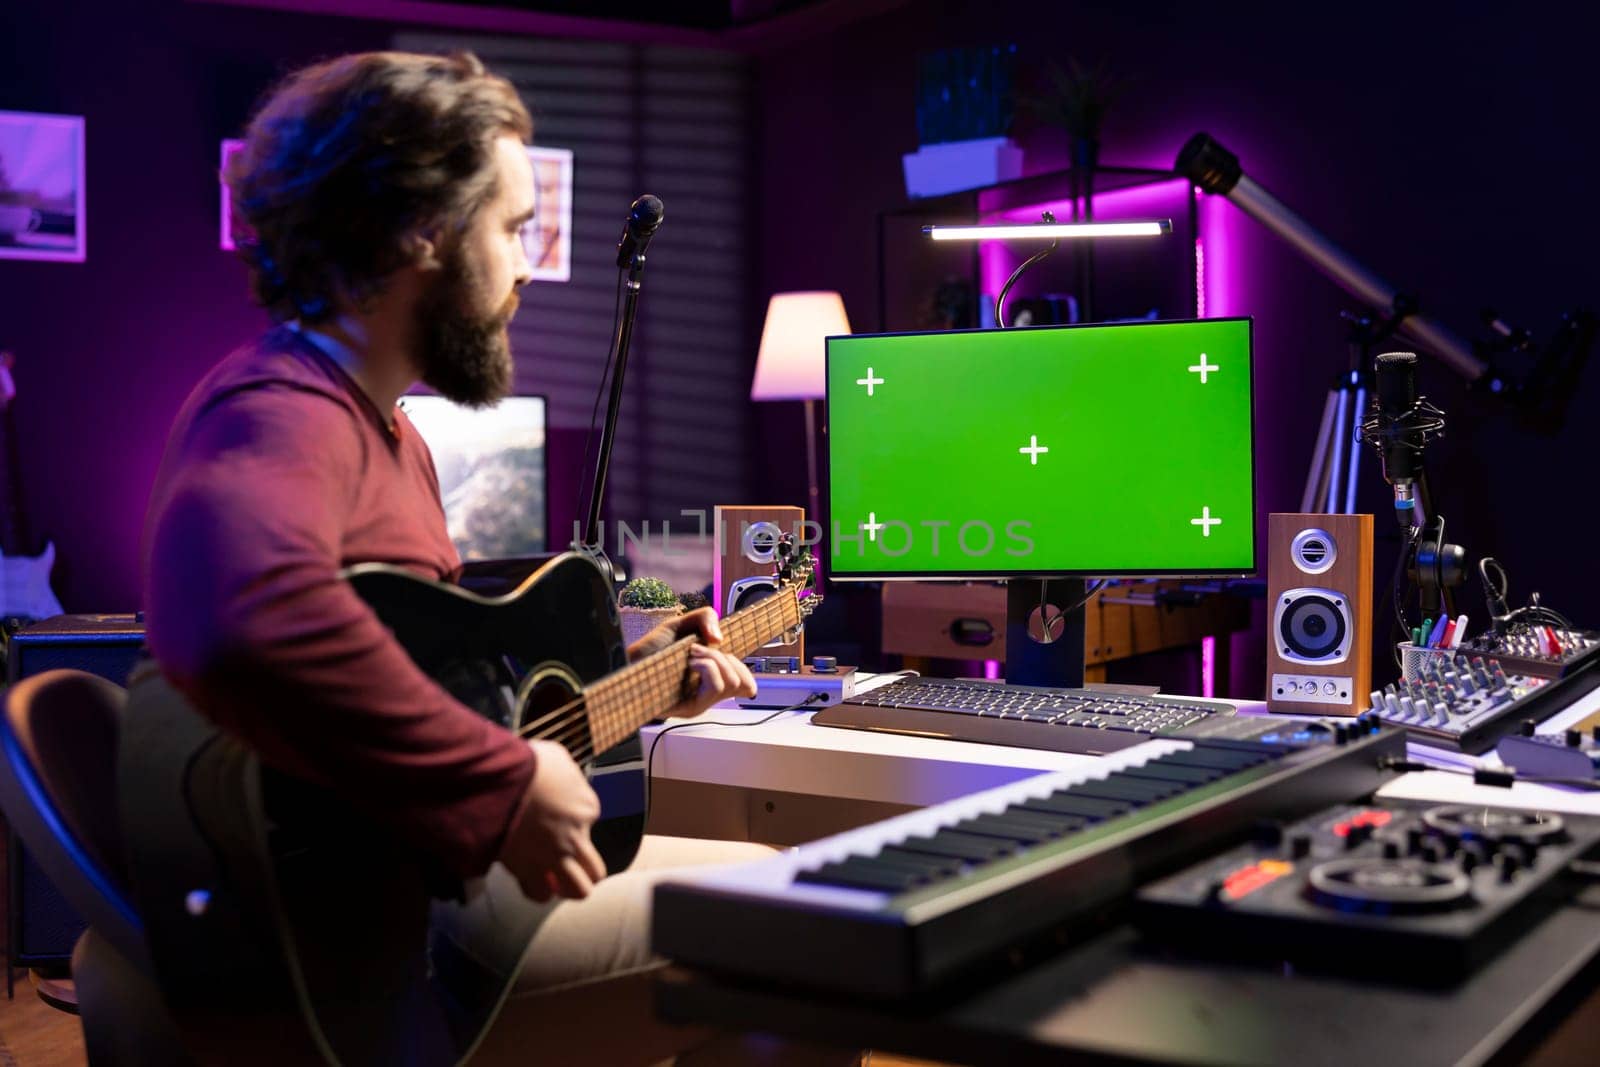 Artist learning to play guitar with internet lessons on greenscreen monitor by DCStudio